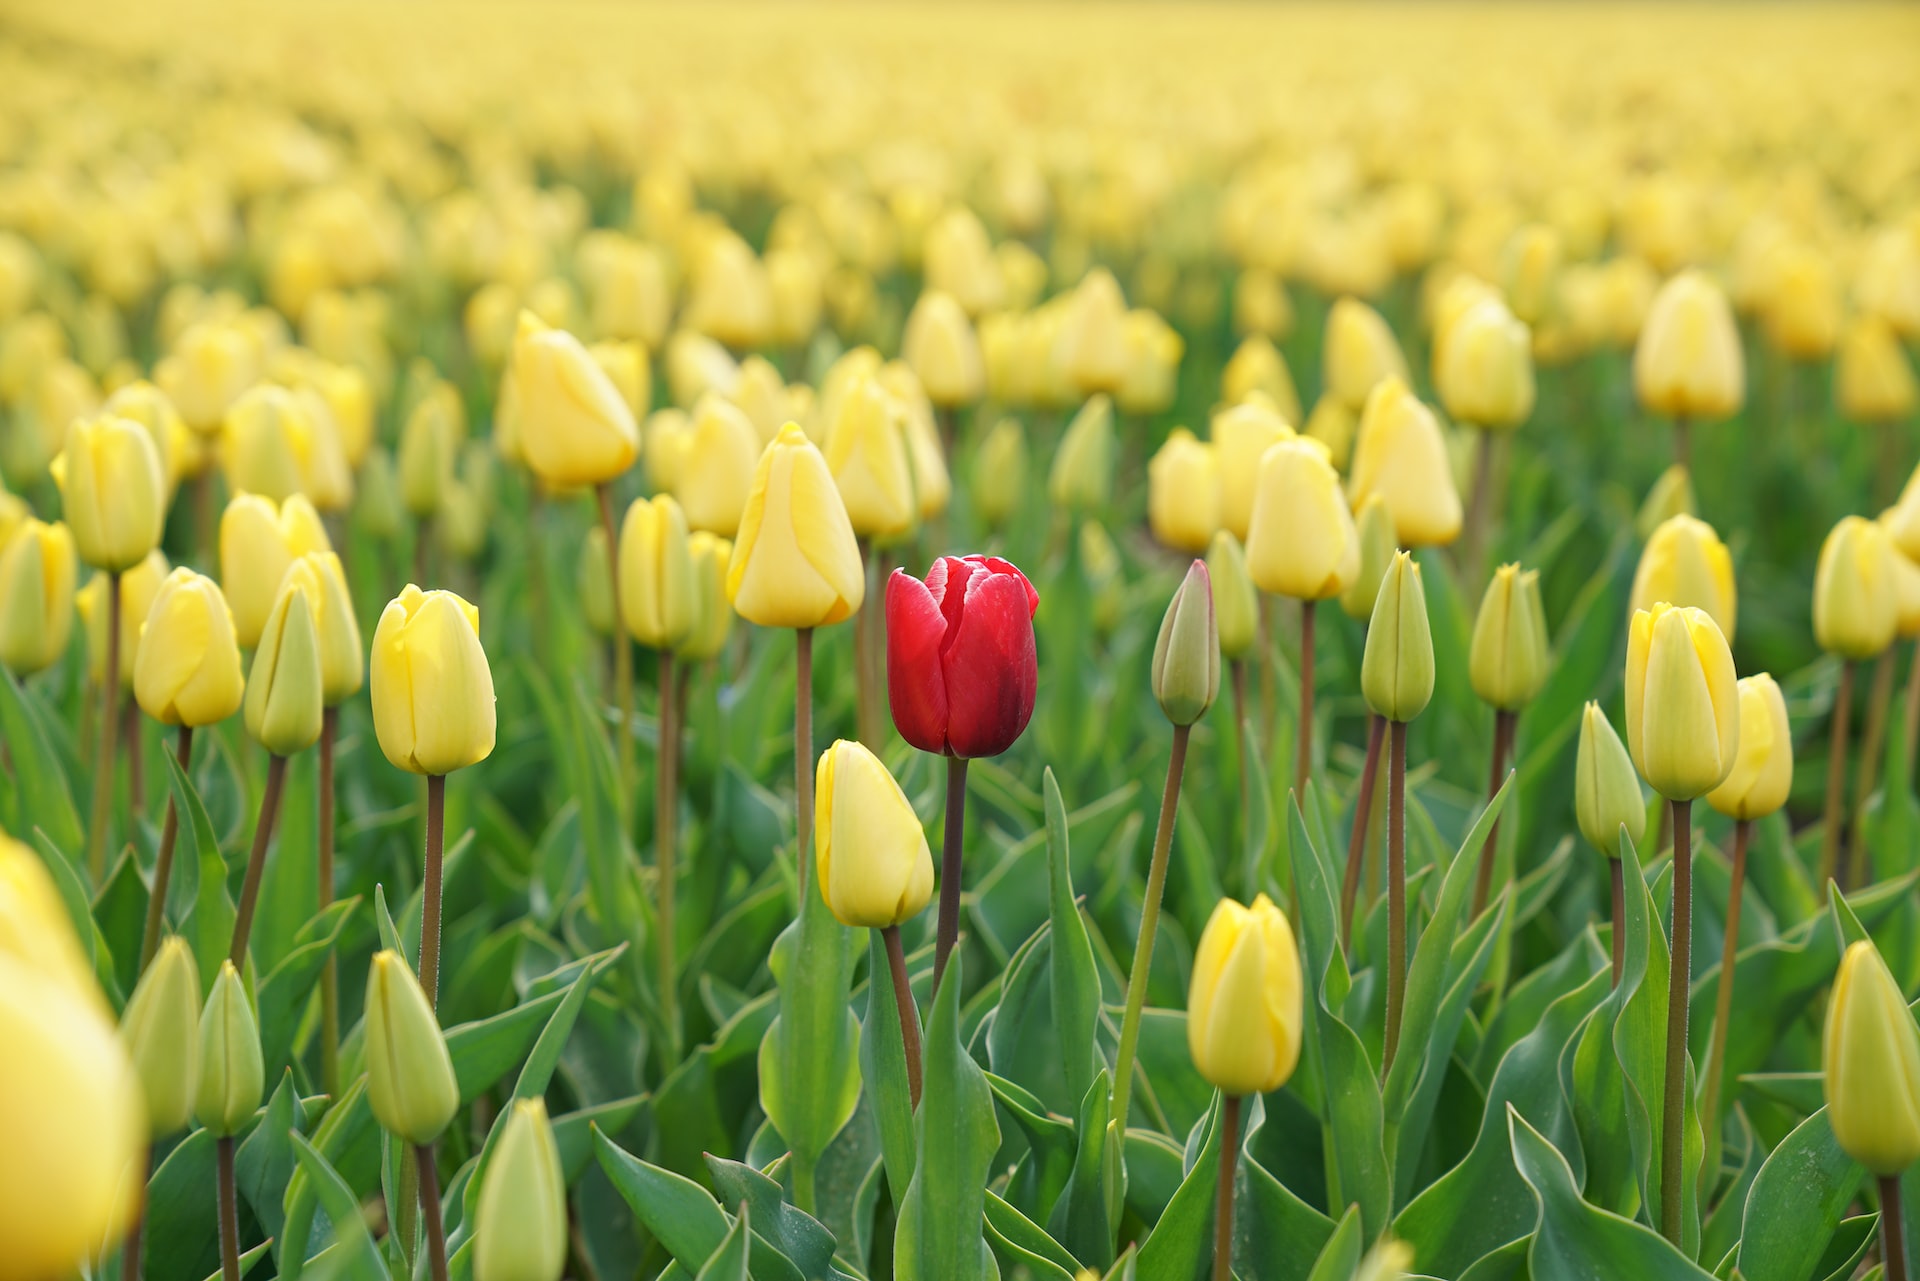 Field of yellow tulips, one red tulip in middle of frame.